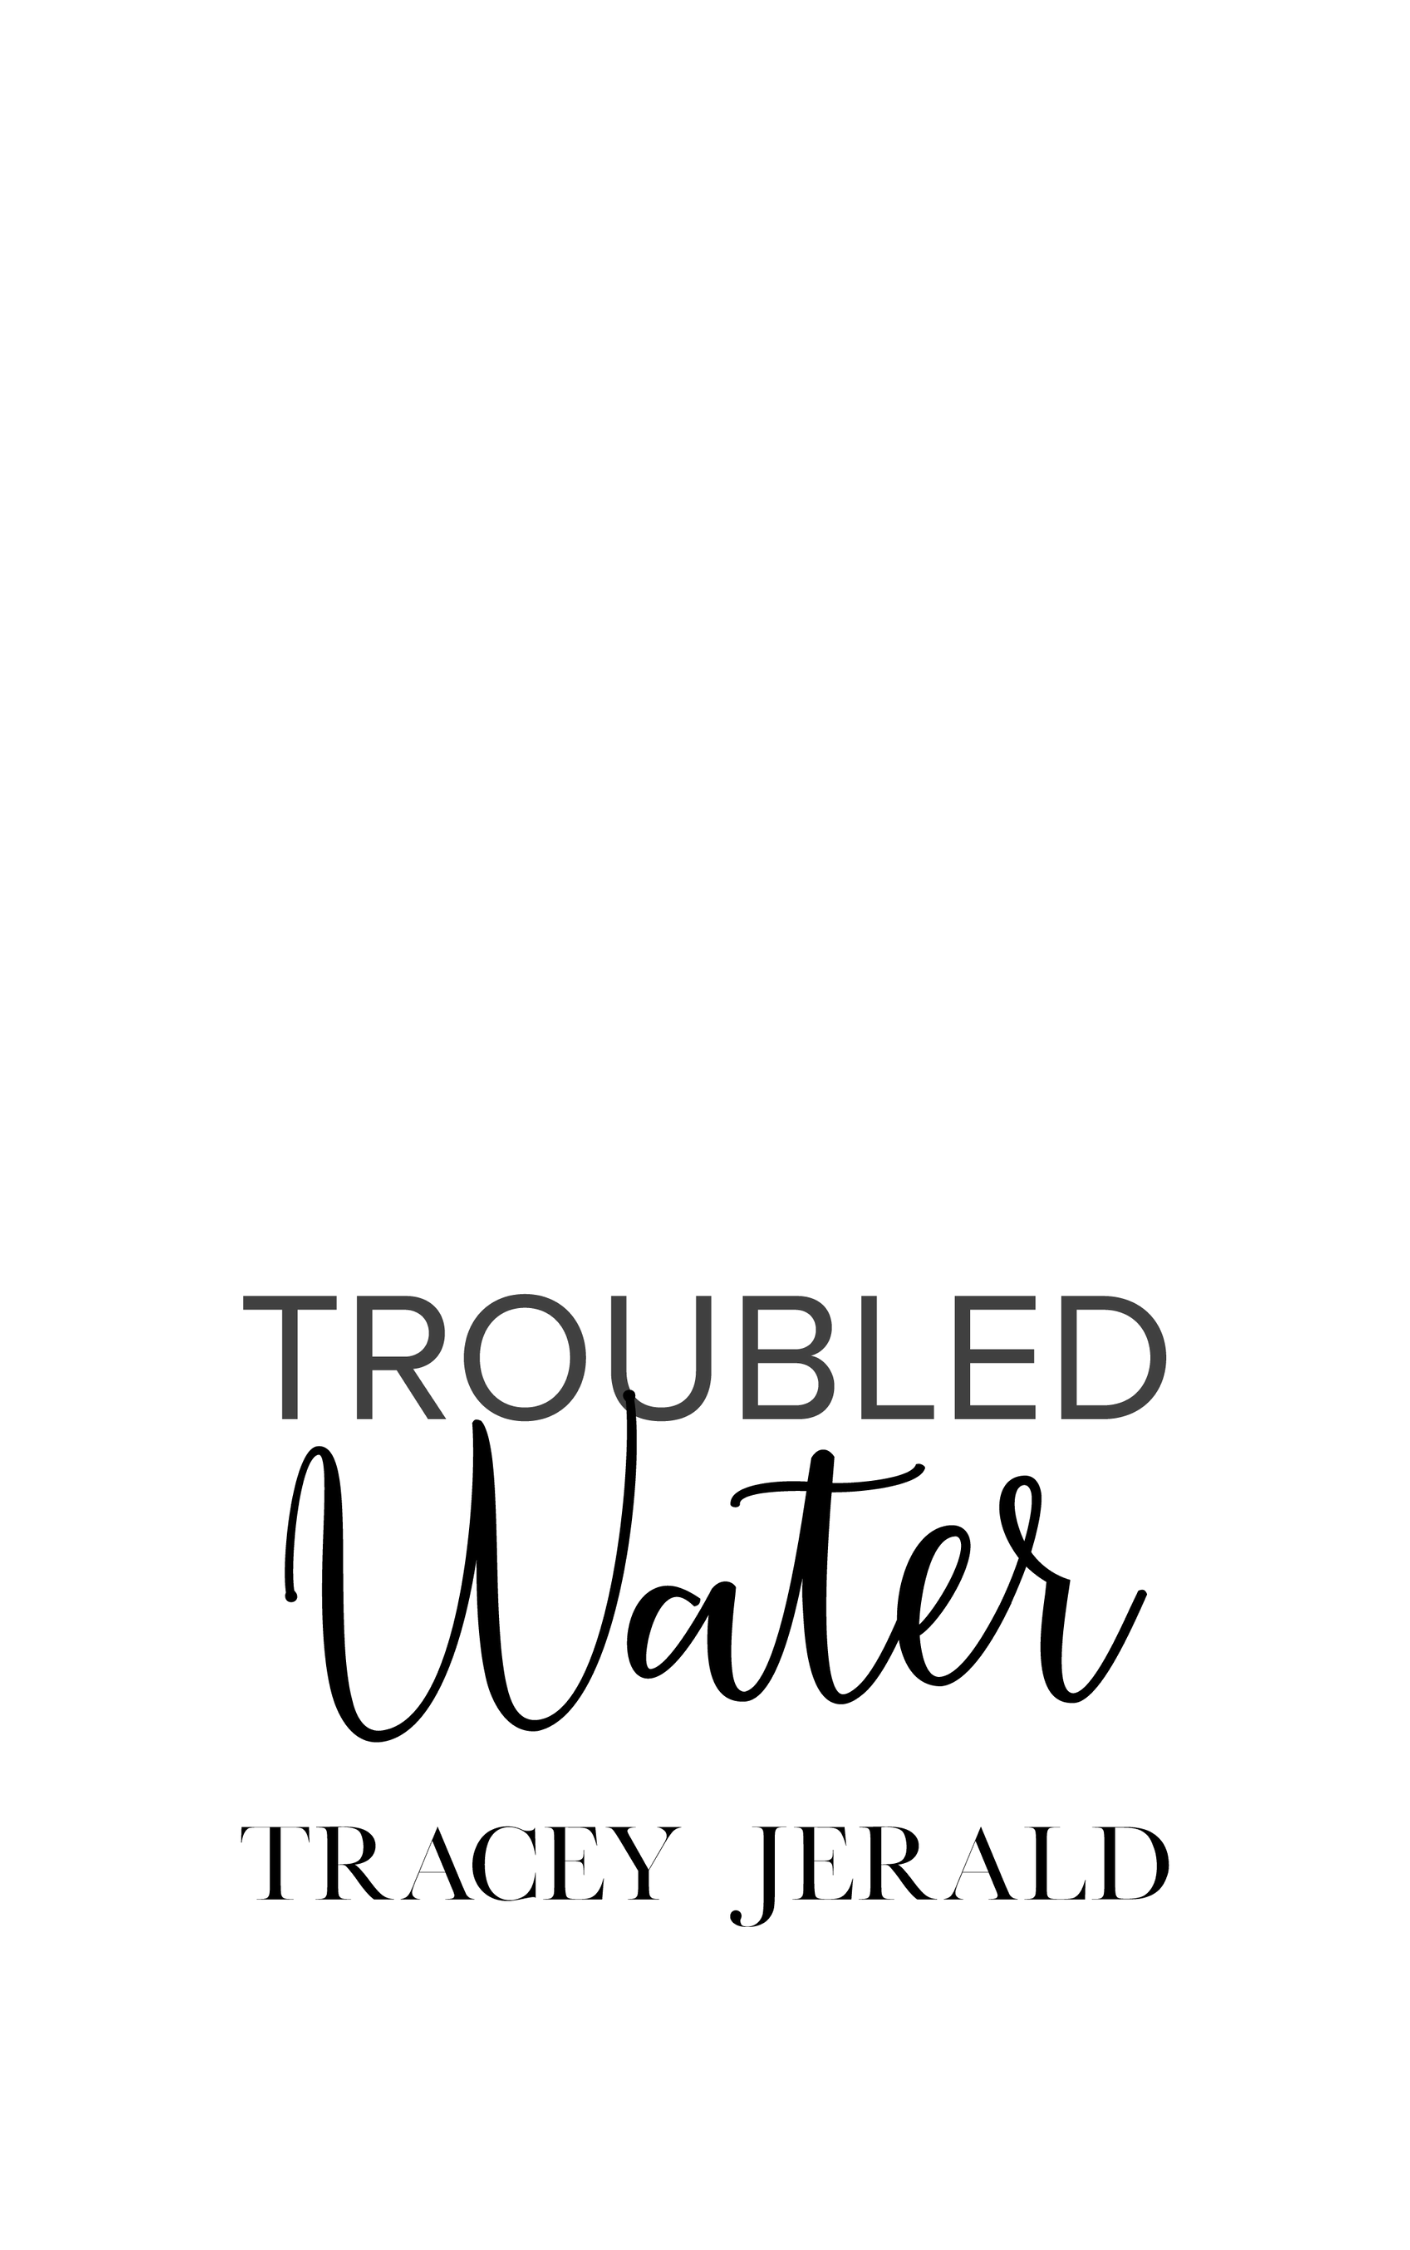 Troubled Water, Tracey Jerald